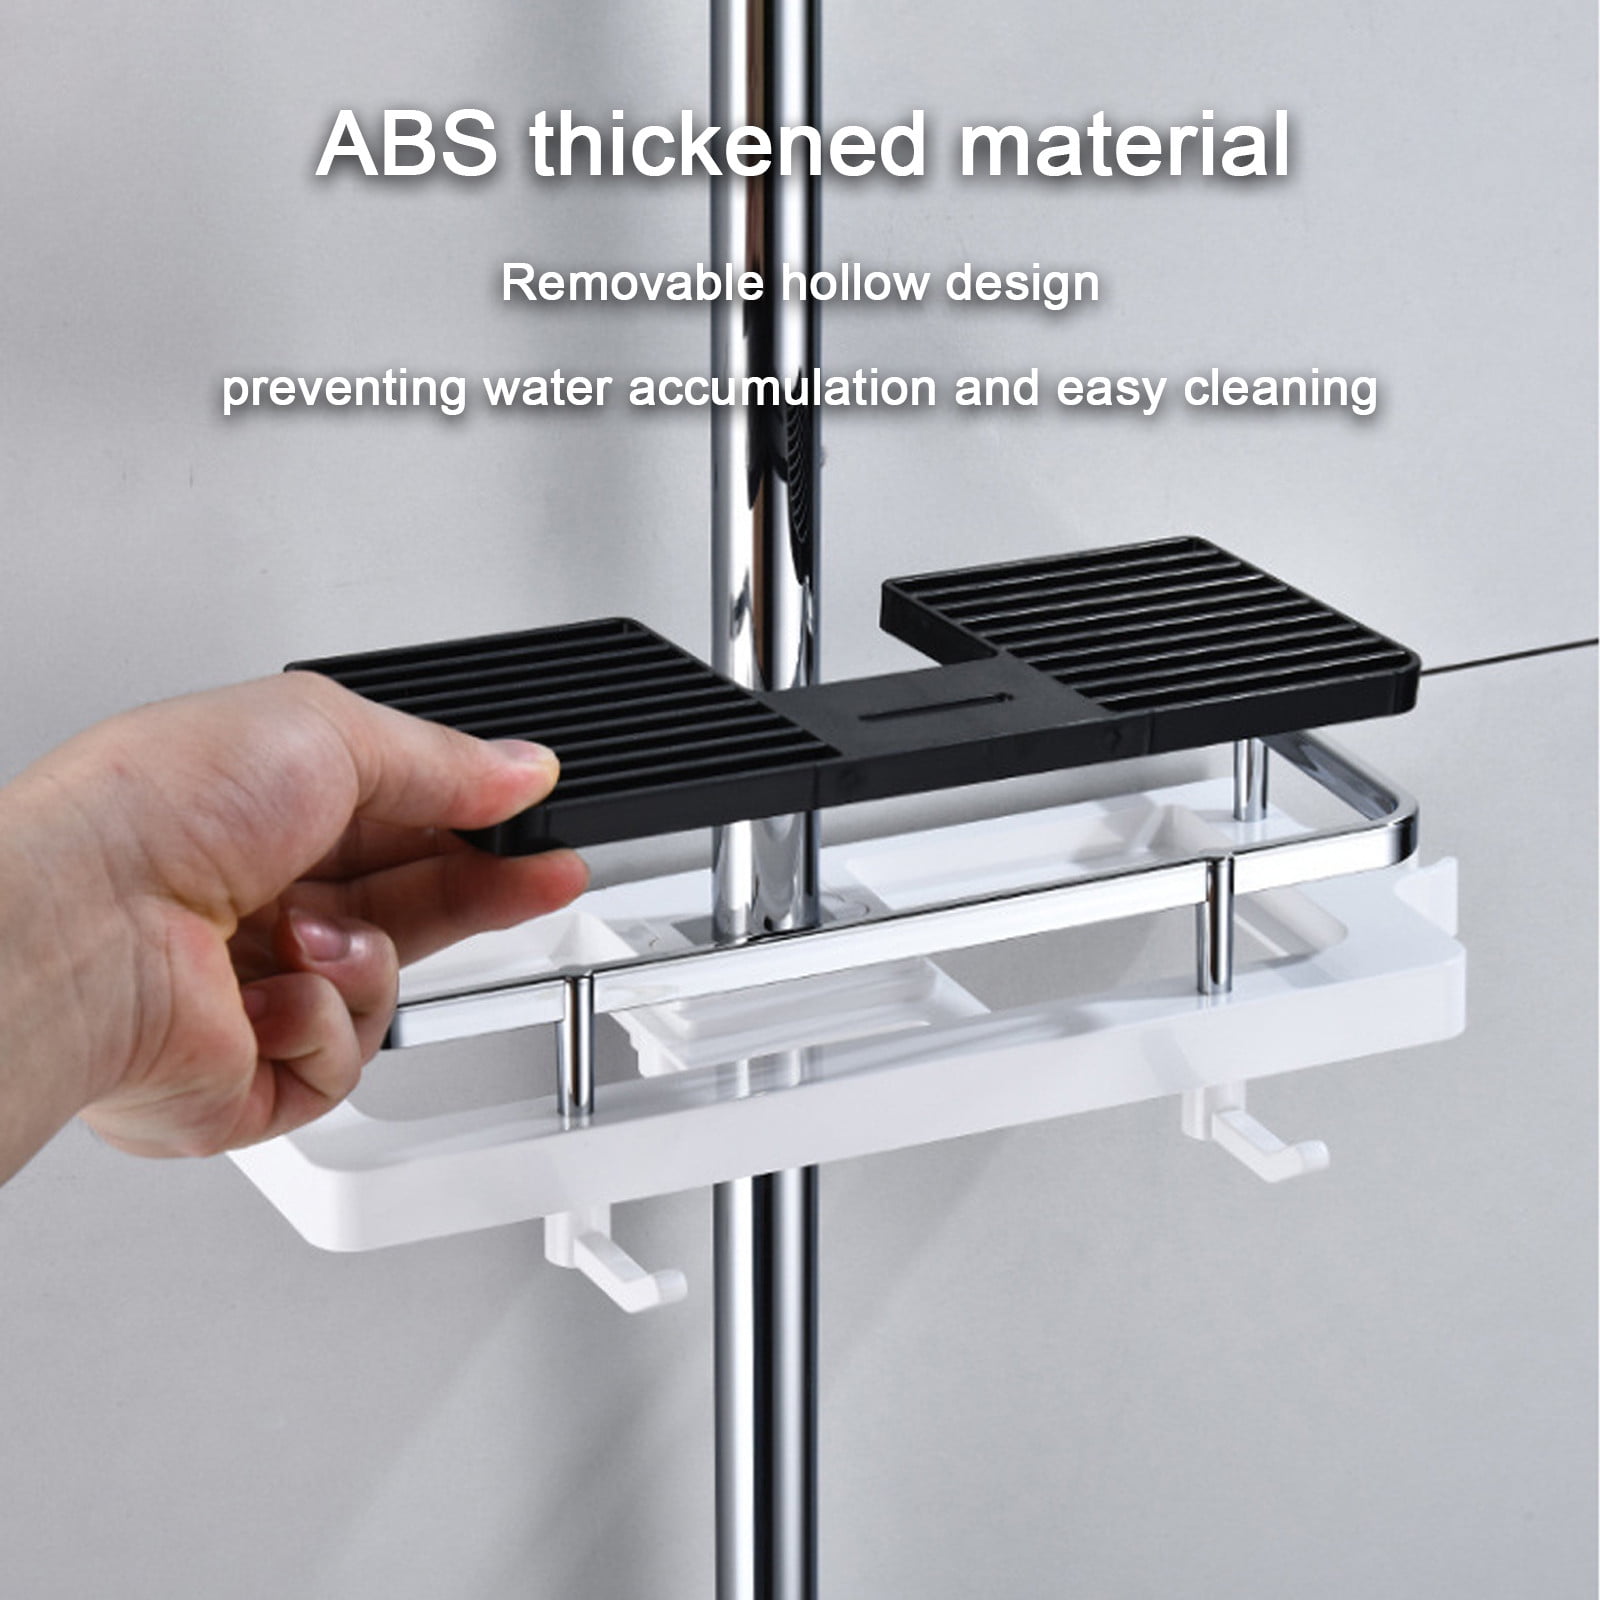 Amlbb Household Tools Shower Rack Punch-free Shower Caddy Shelves Slide Bar for Shower Head, Shampoo, Soap HolderSuitcase,with Stainless Steel Guardrail